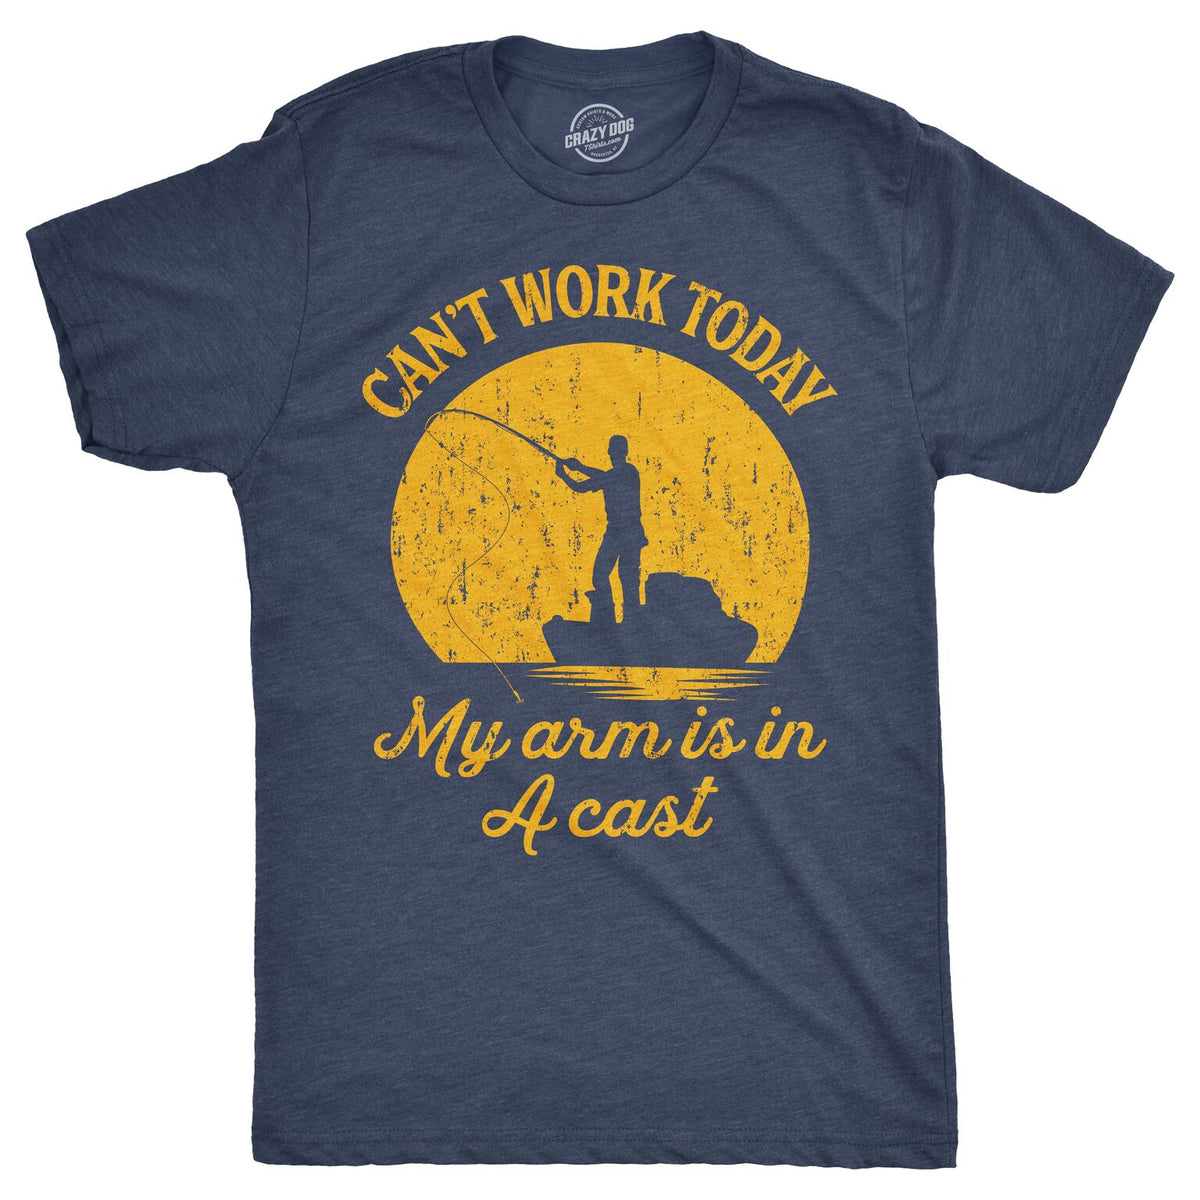 Mens Can't Work Today My Arm Is in A Cast T-Shirt Funny Fishing Fathers Day Tee